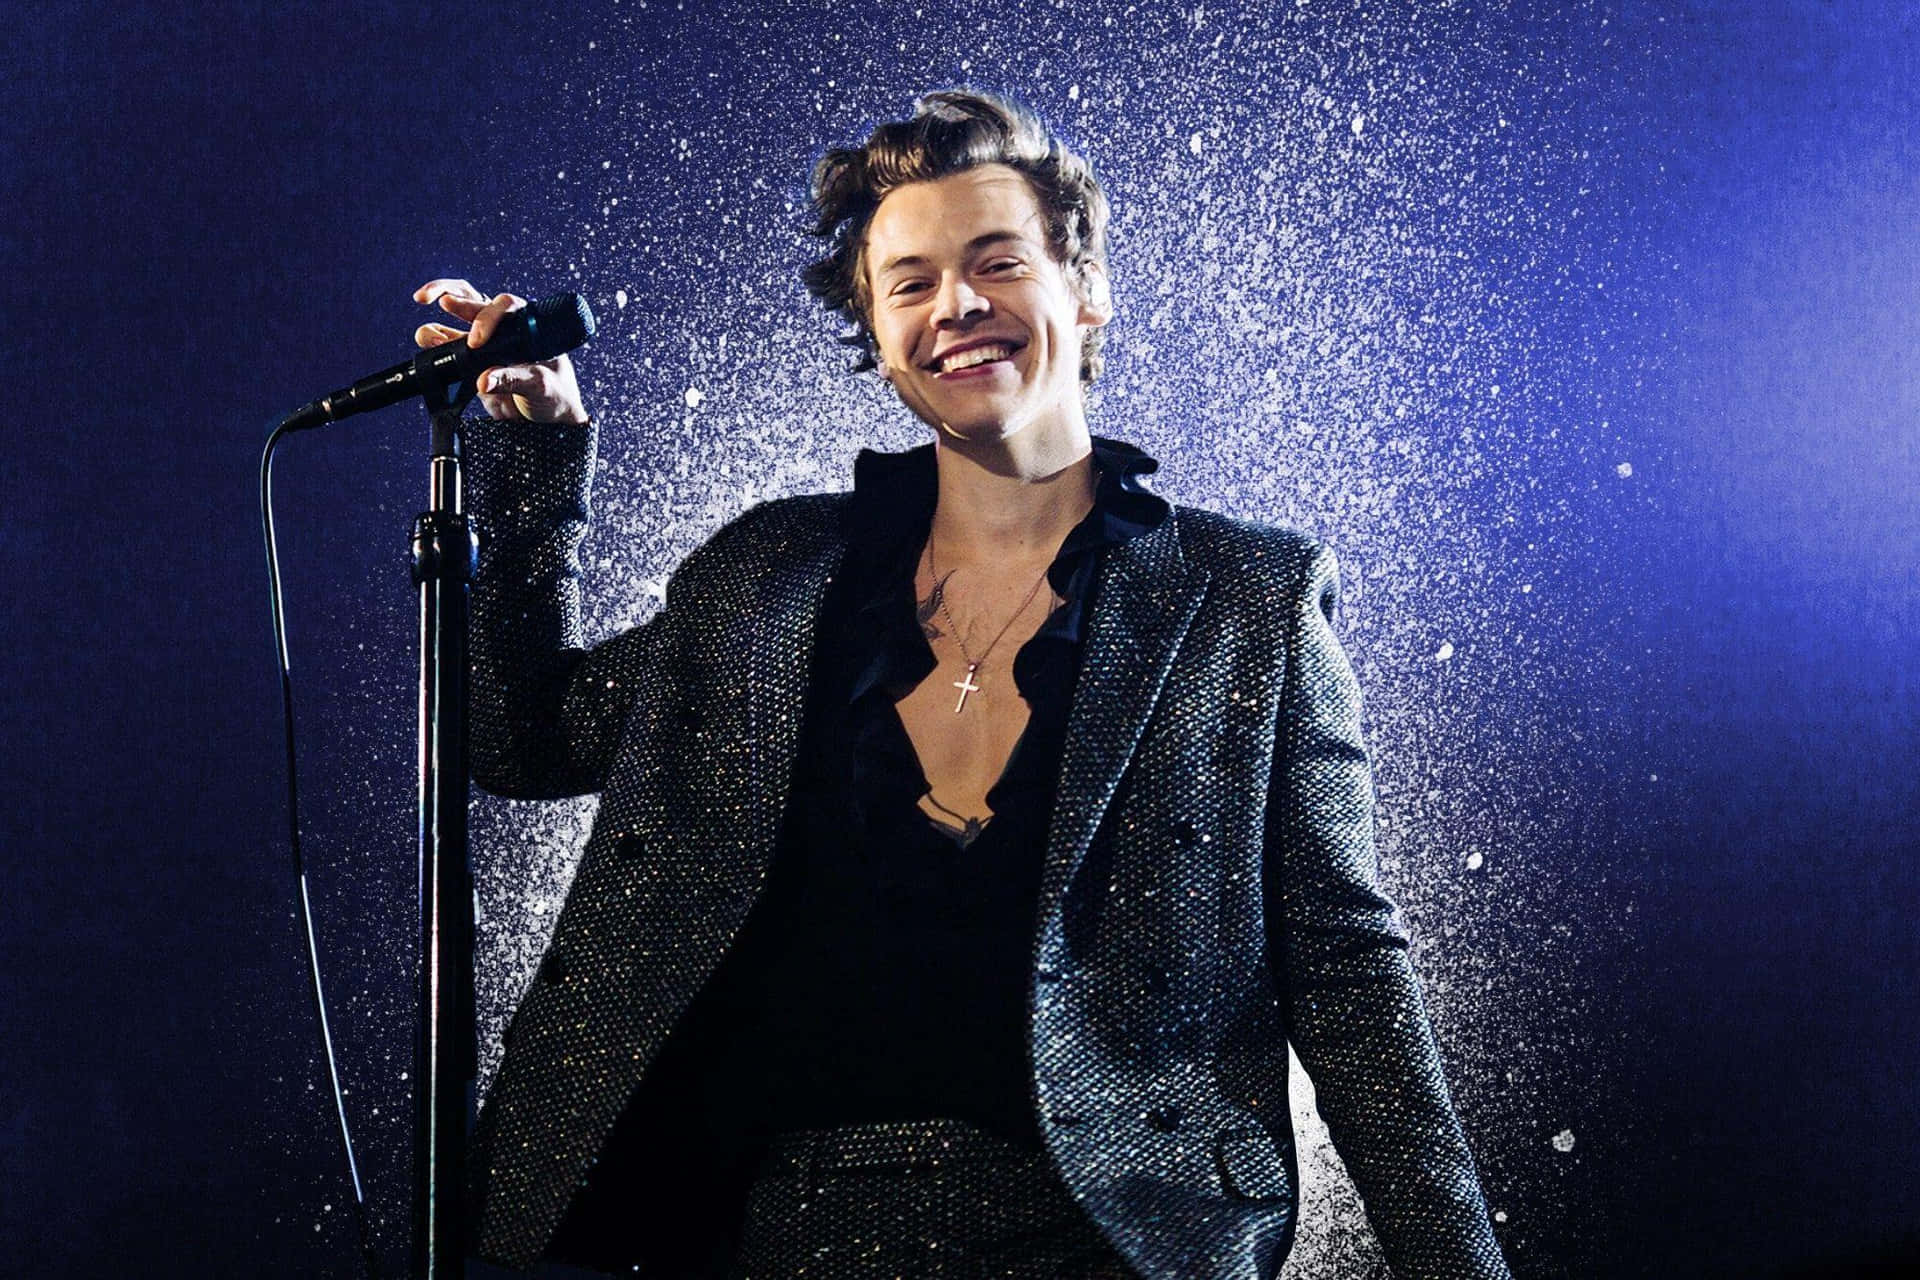 Harry Styles giving a fun performance